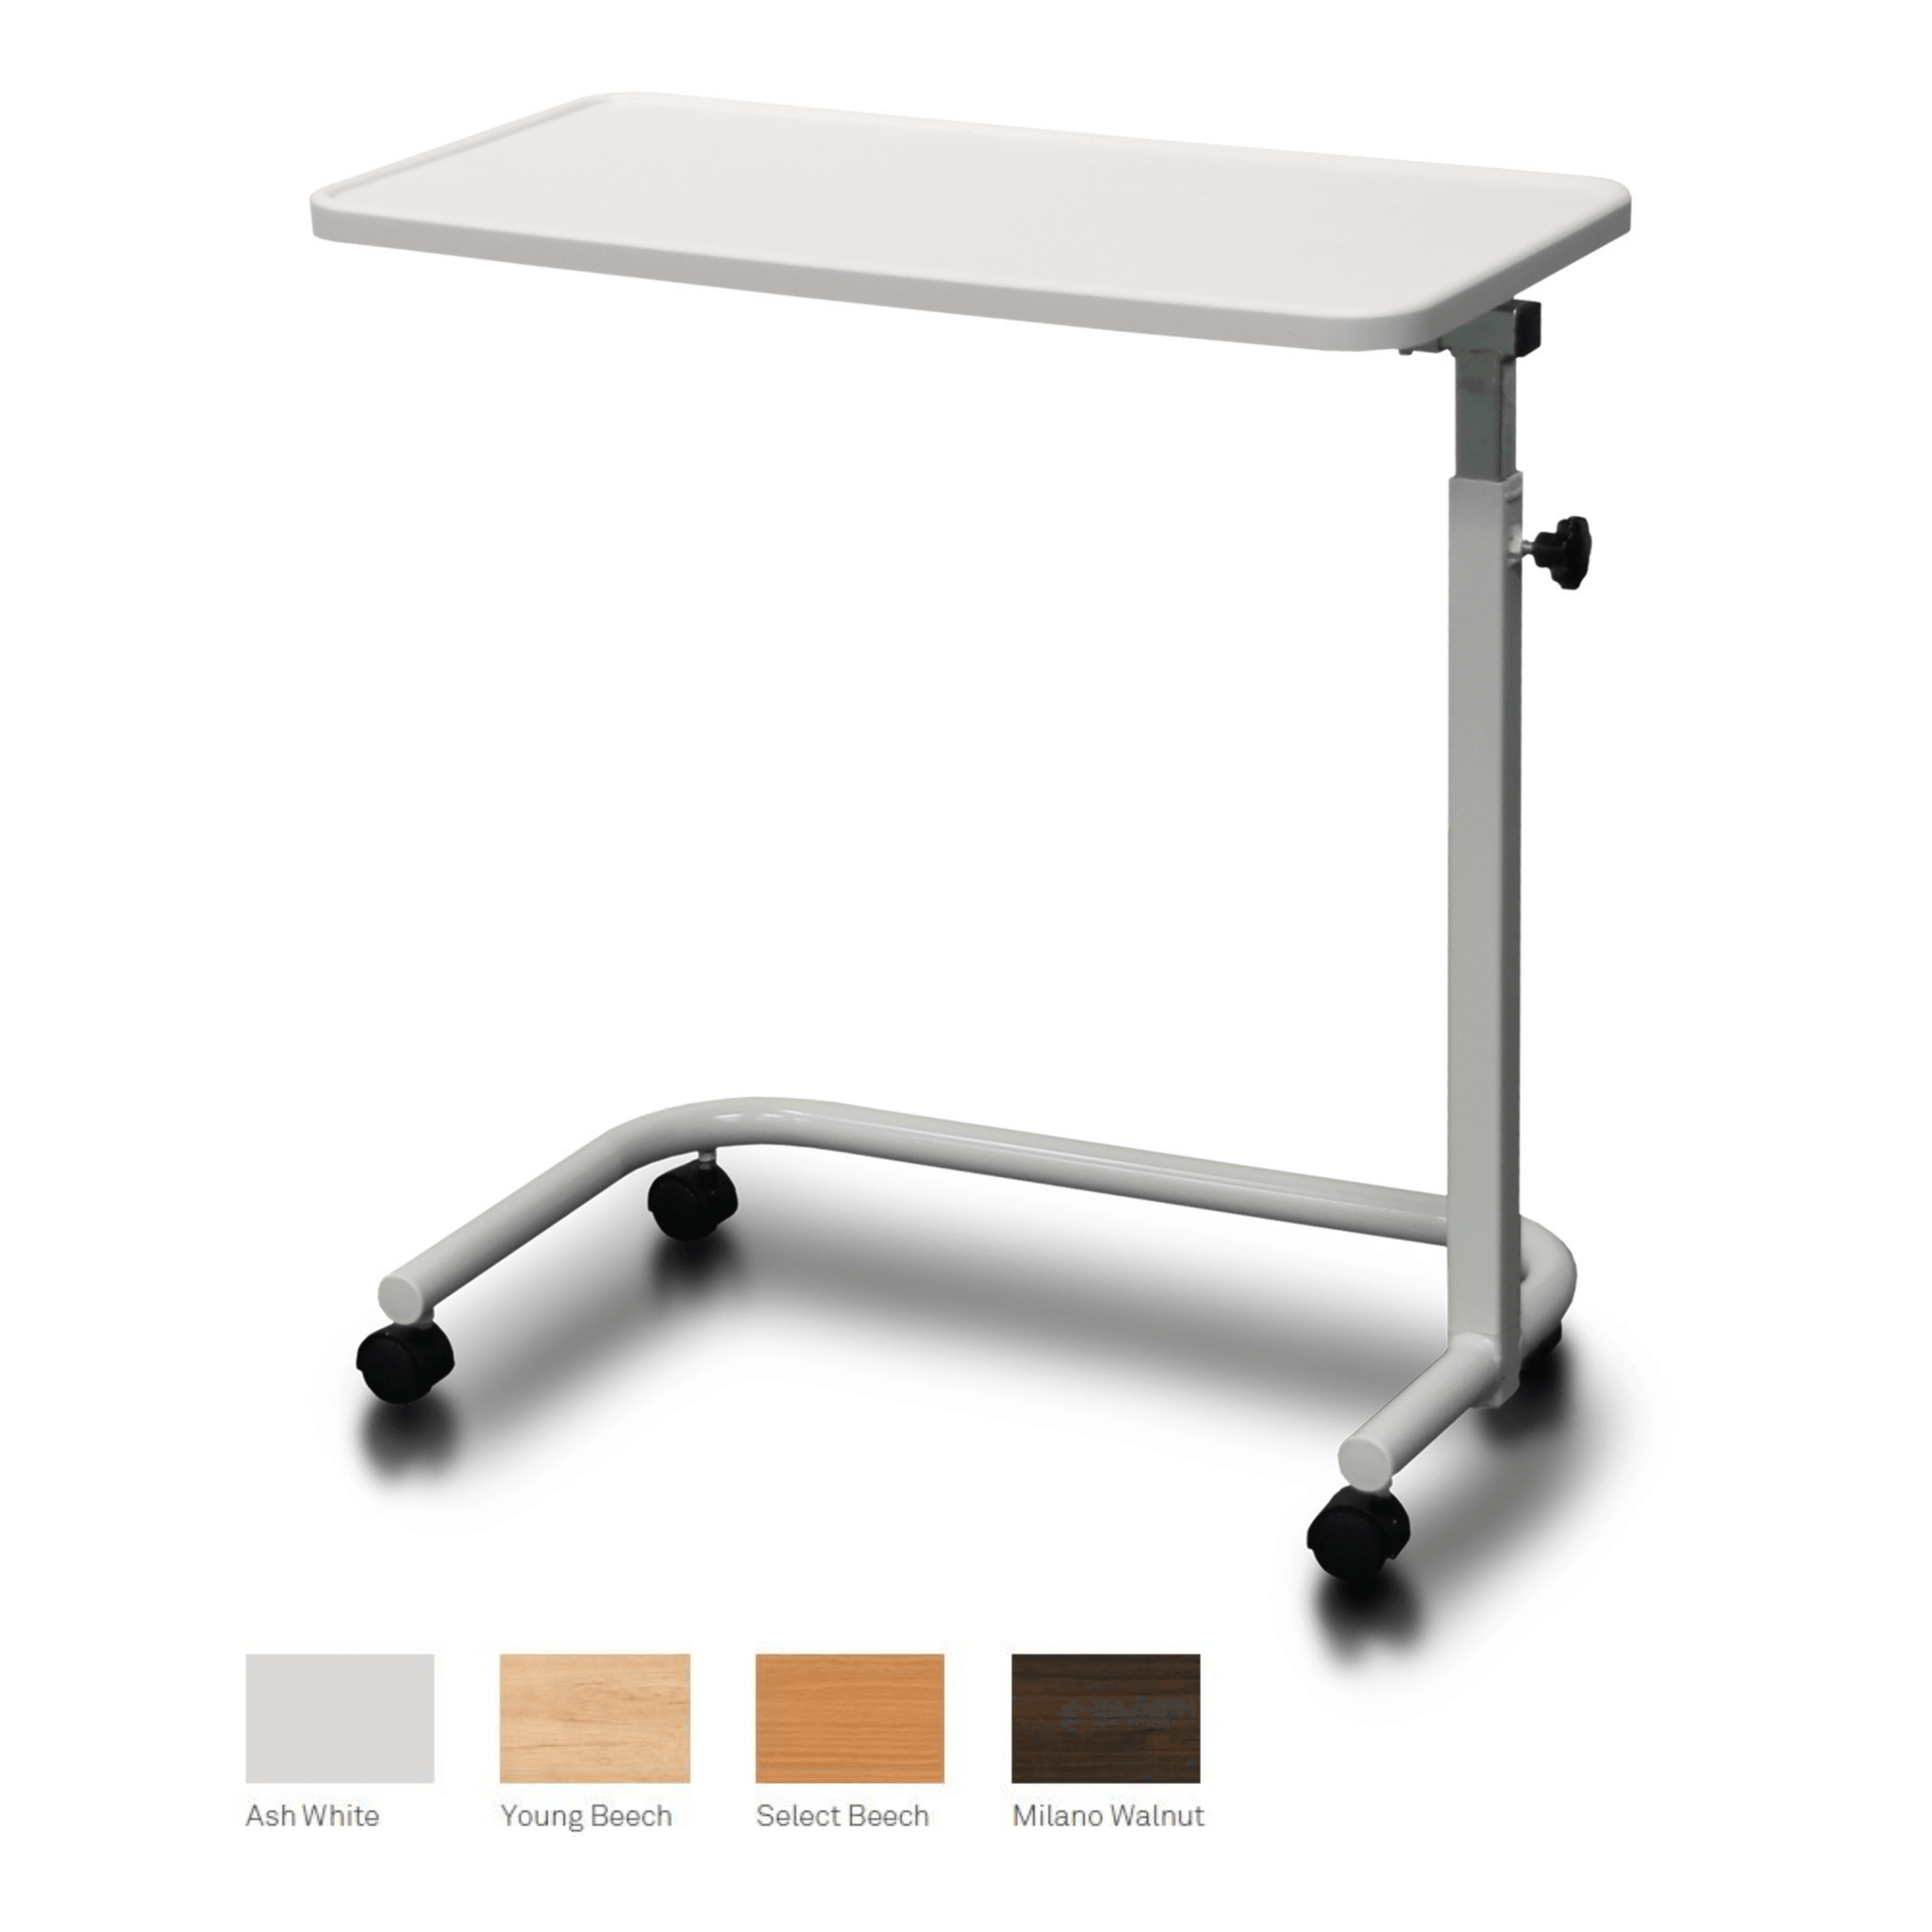 Fixed Top Overbed Table- Manual Height Adjustment, Ash White - 2